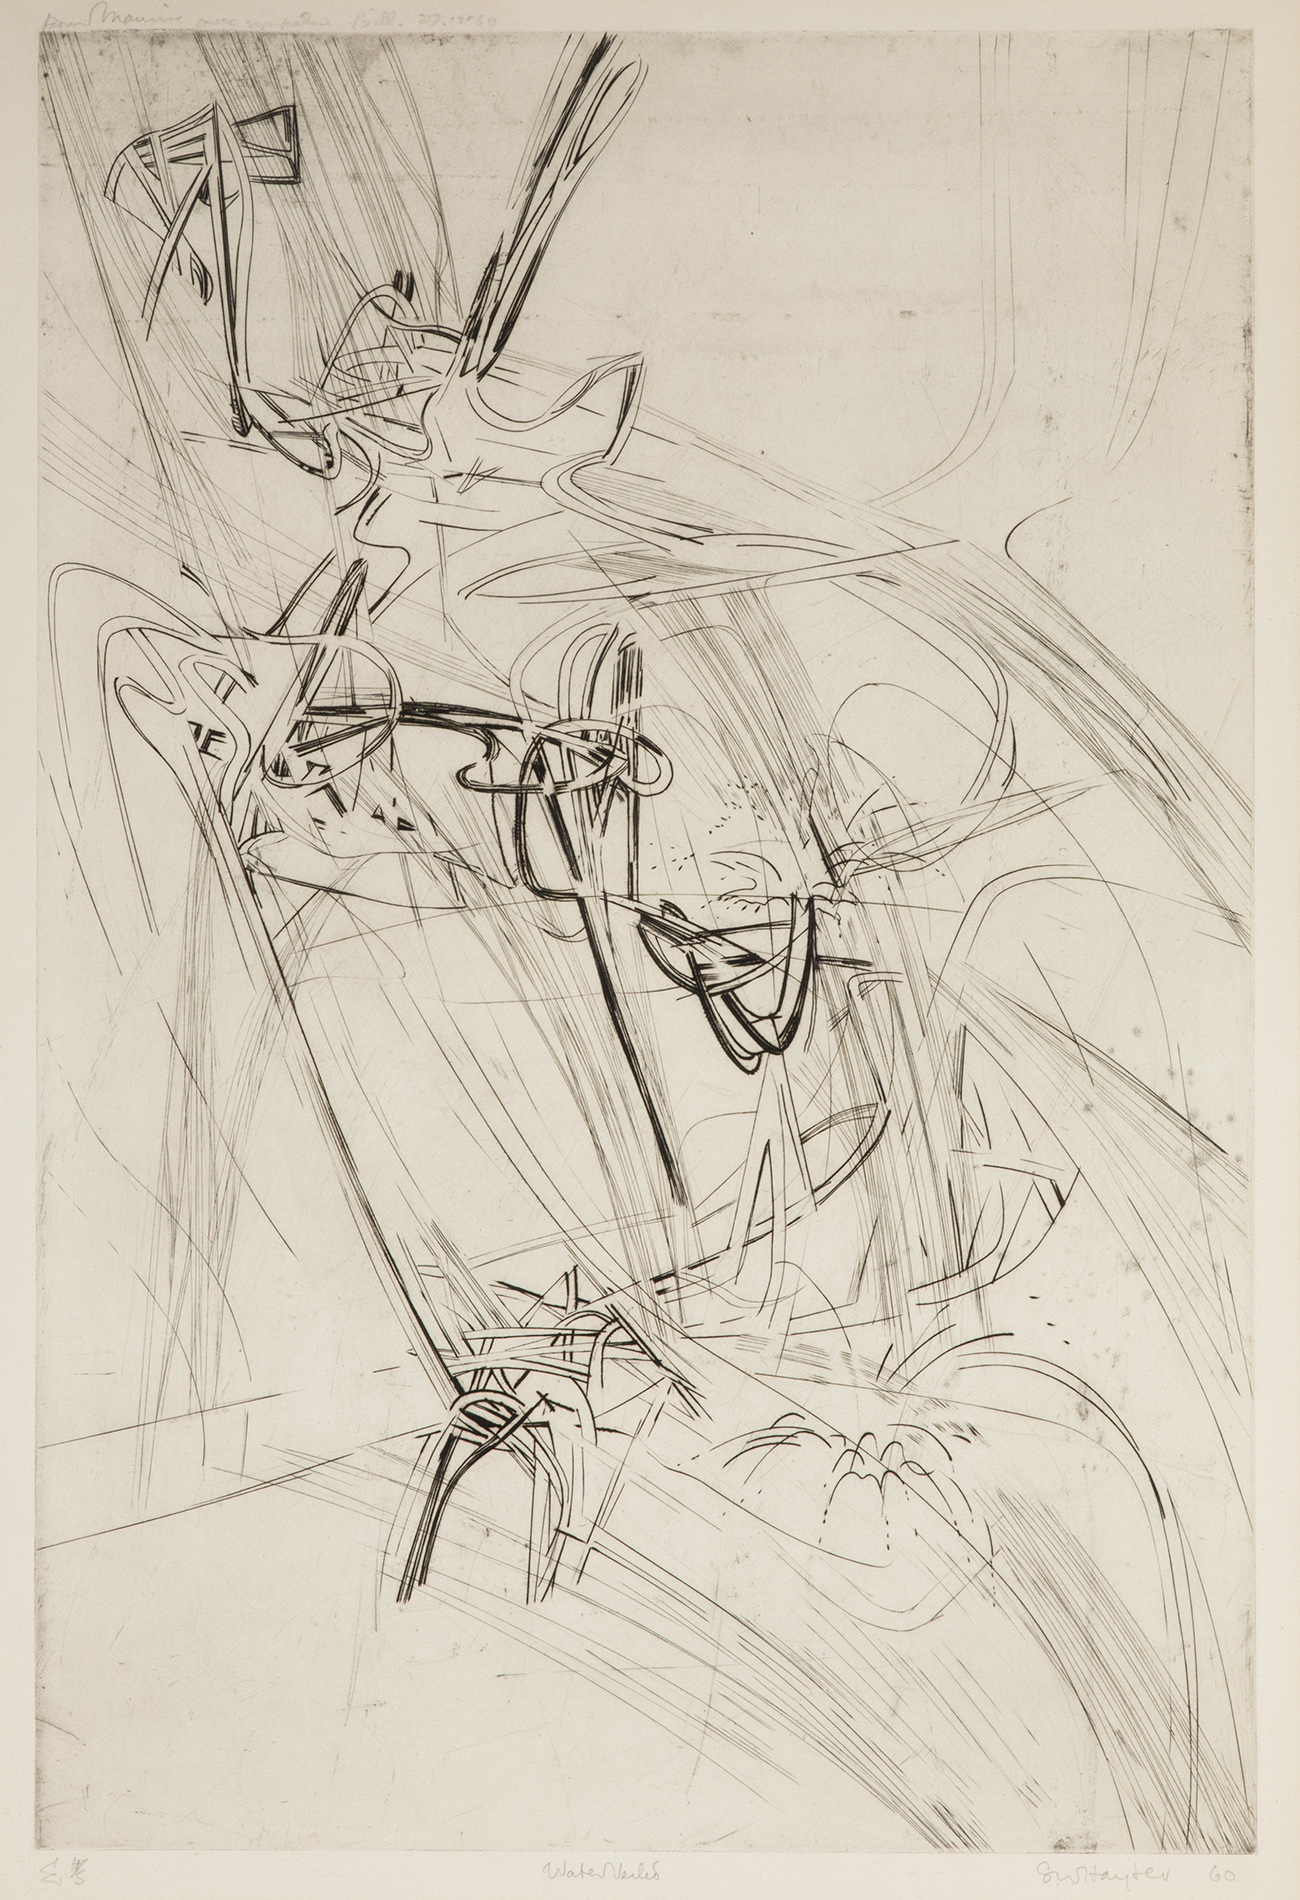 STANLEY WILLIAM HAYTER (London, 1901-1988).Untitled. Copy 4/5.Drypoint engraving on paper.Signed and